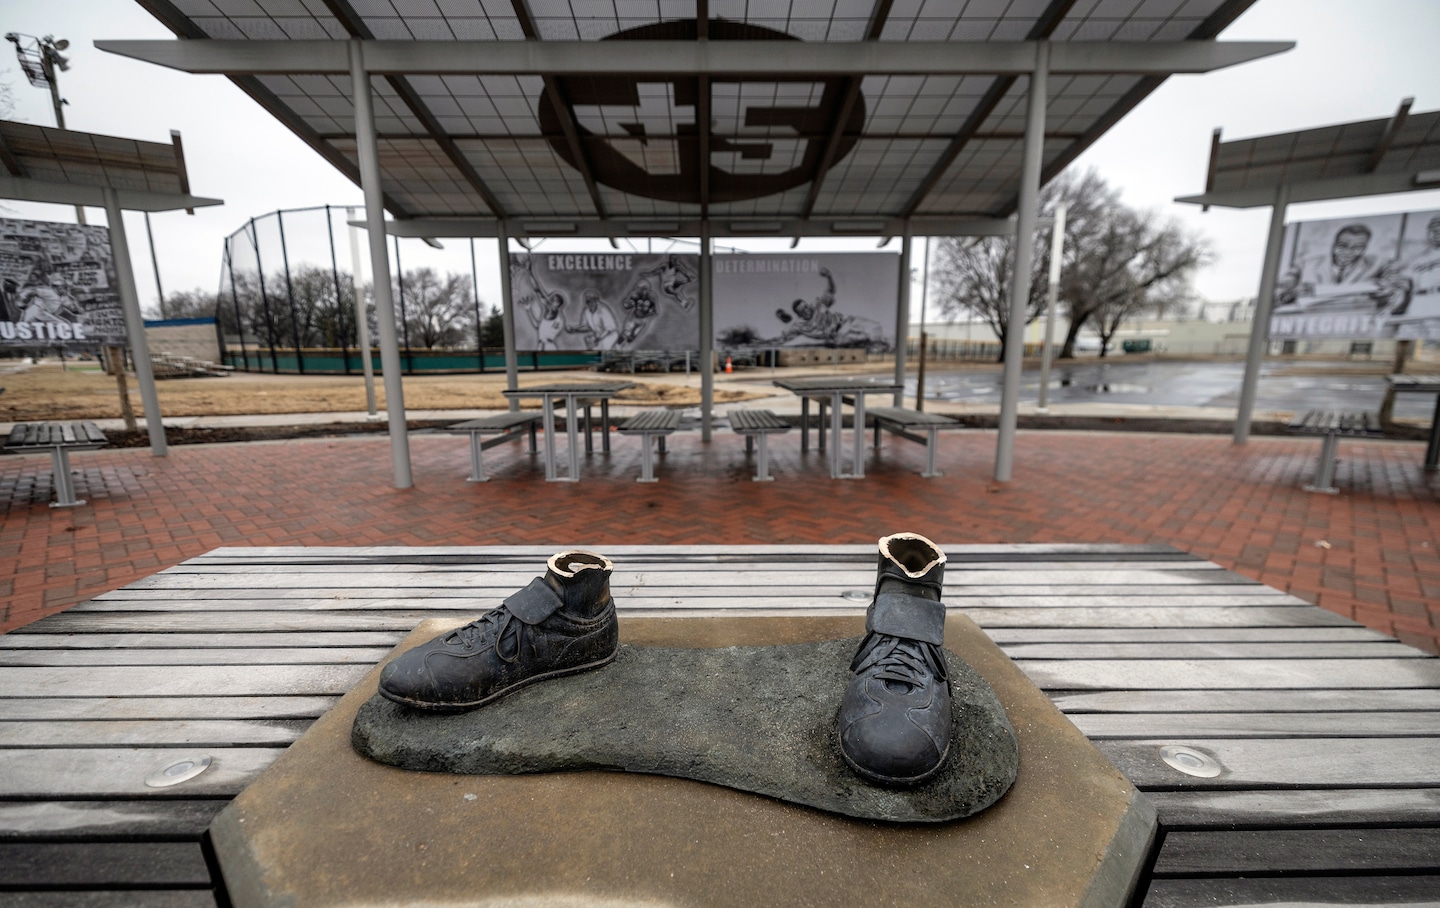 Jackie Robinson statue found burned, dismantled in Wichita trash can